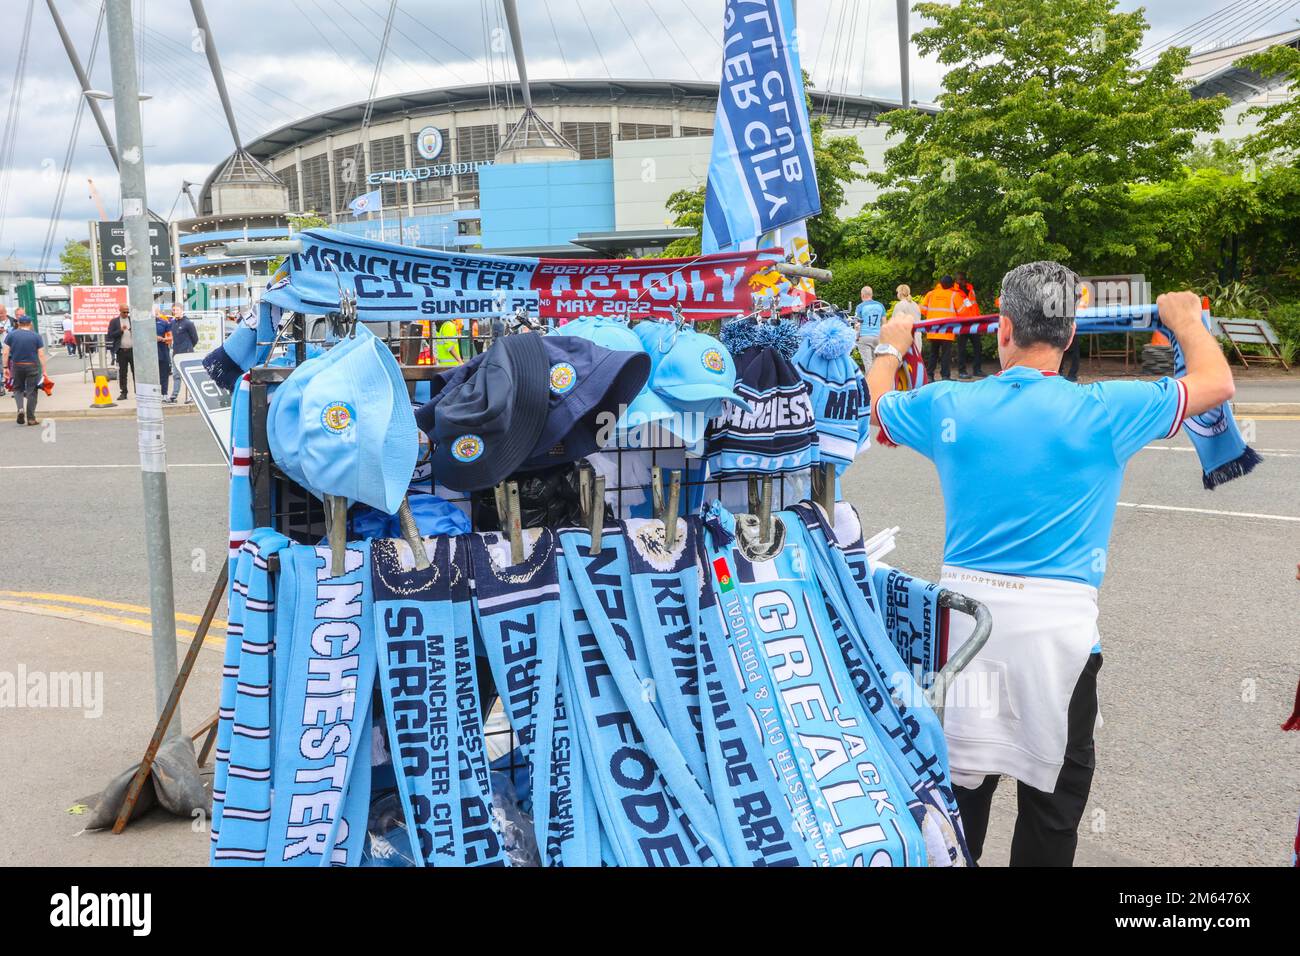 Half and Half scarf,scarves,Etihad Stadium,Manchester City,Manchester City football club,fans,Manchester,city,city centre,center,North West, England,North West England,English,English City,Levelling Up,Greater Manchester, GB,Great Britain,Britain,British,UK,United Kingdom,English city, Stock Photo